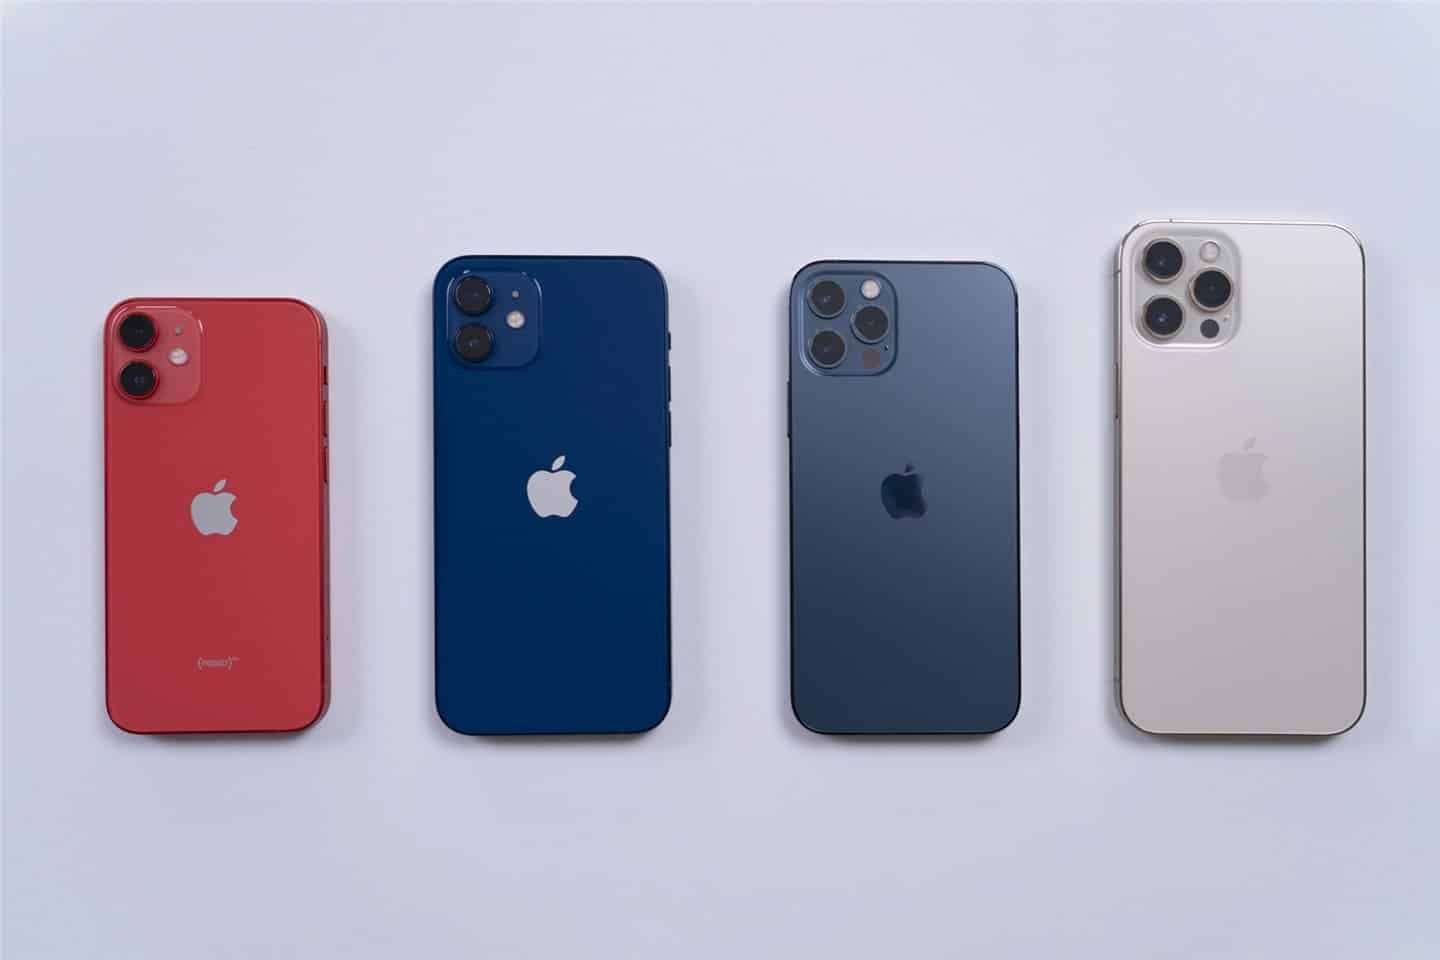 iPhone 13 Will Ship More Than iPhone 12 Due To More Mature 5G Market